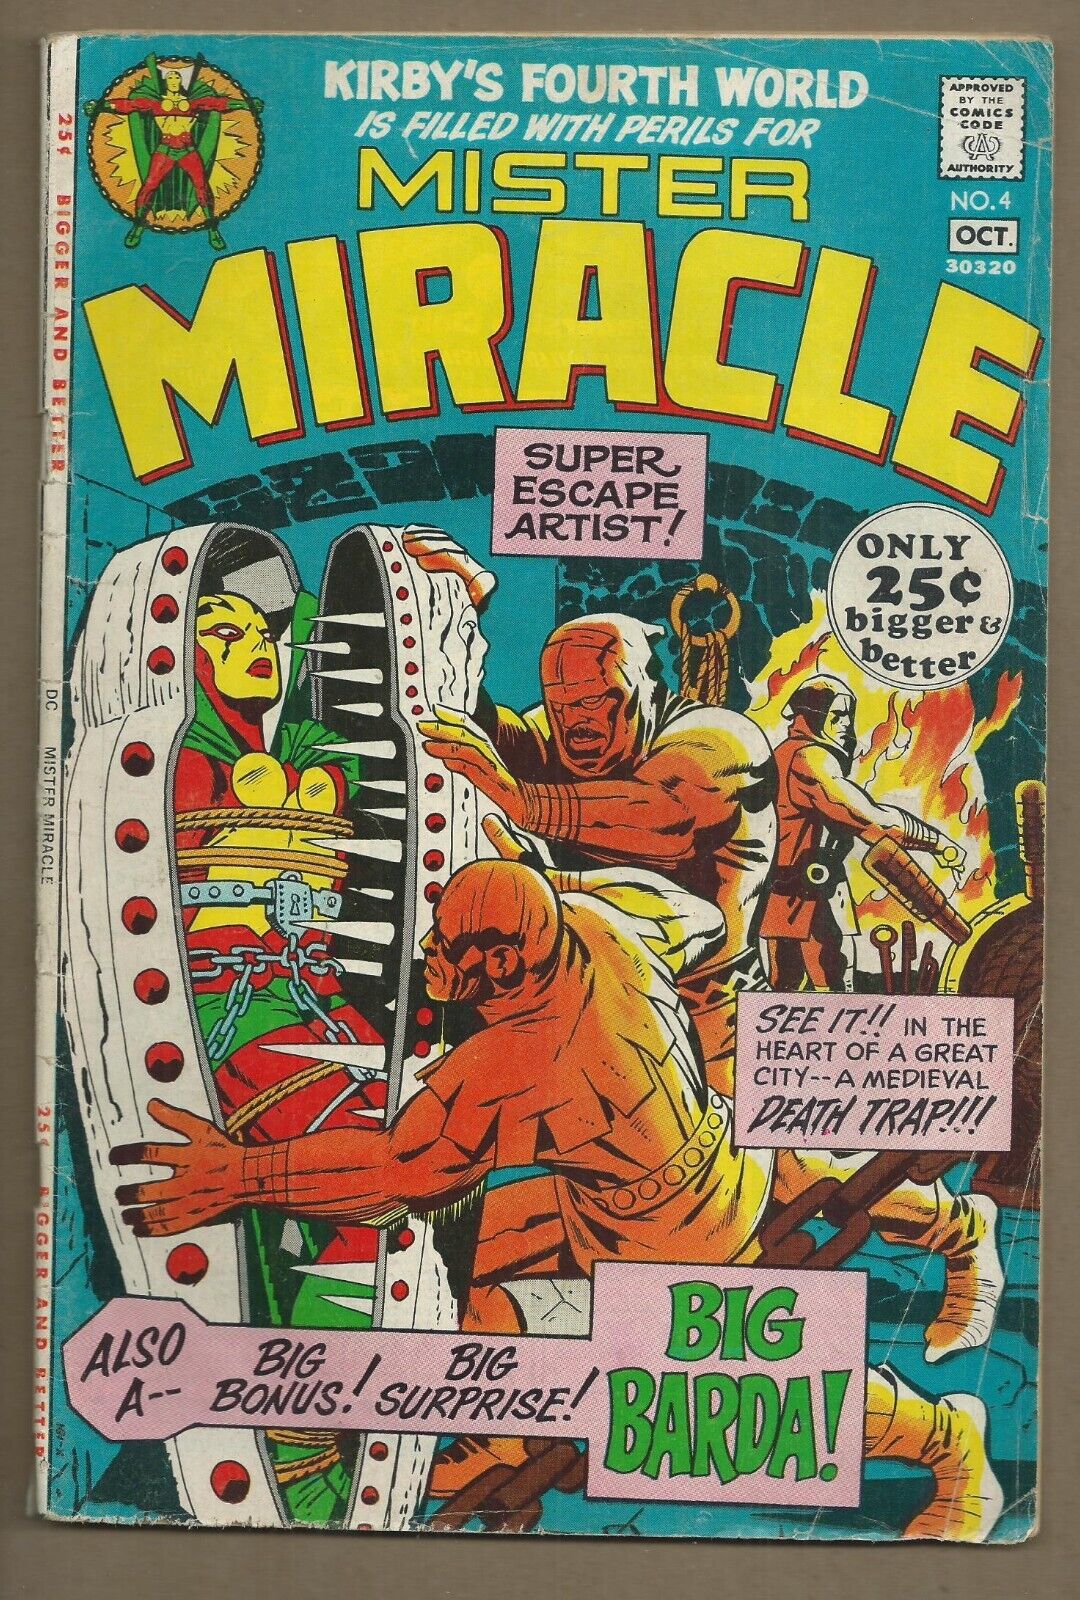 🔥MISTER MIRACLE #4*DC, 1971*1ST APP. OF BIG BARDA*BRONZE AGE*JACK KIRBY*VG/GD*